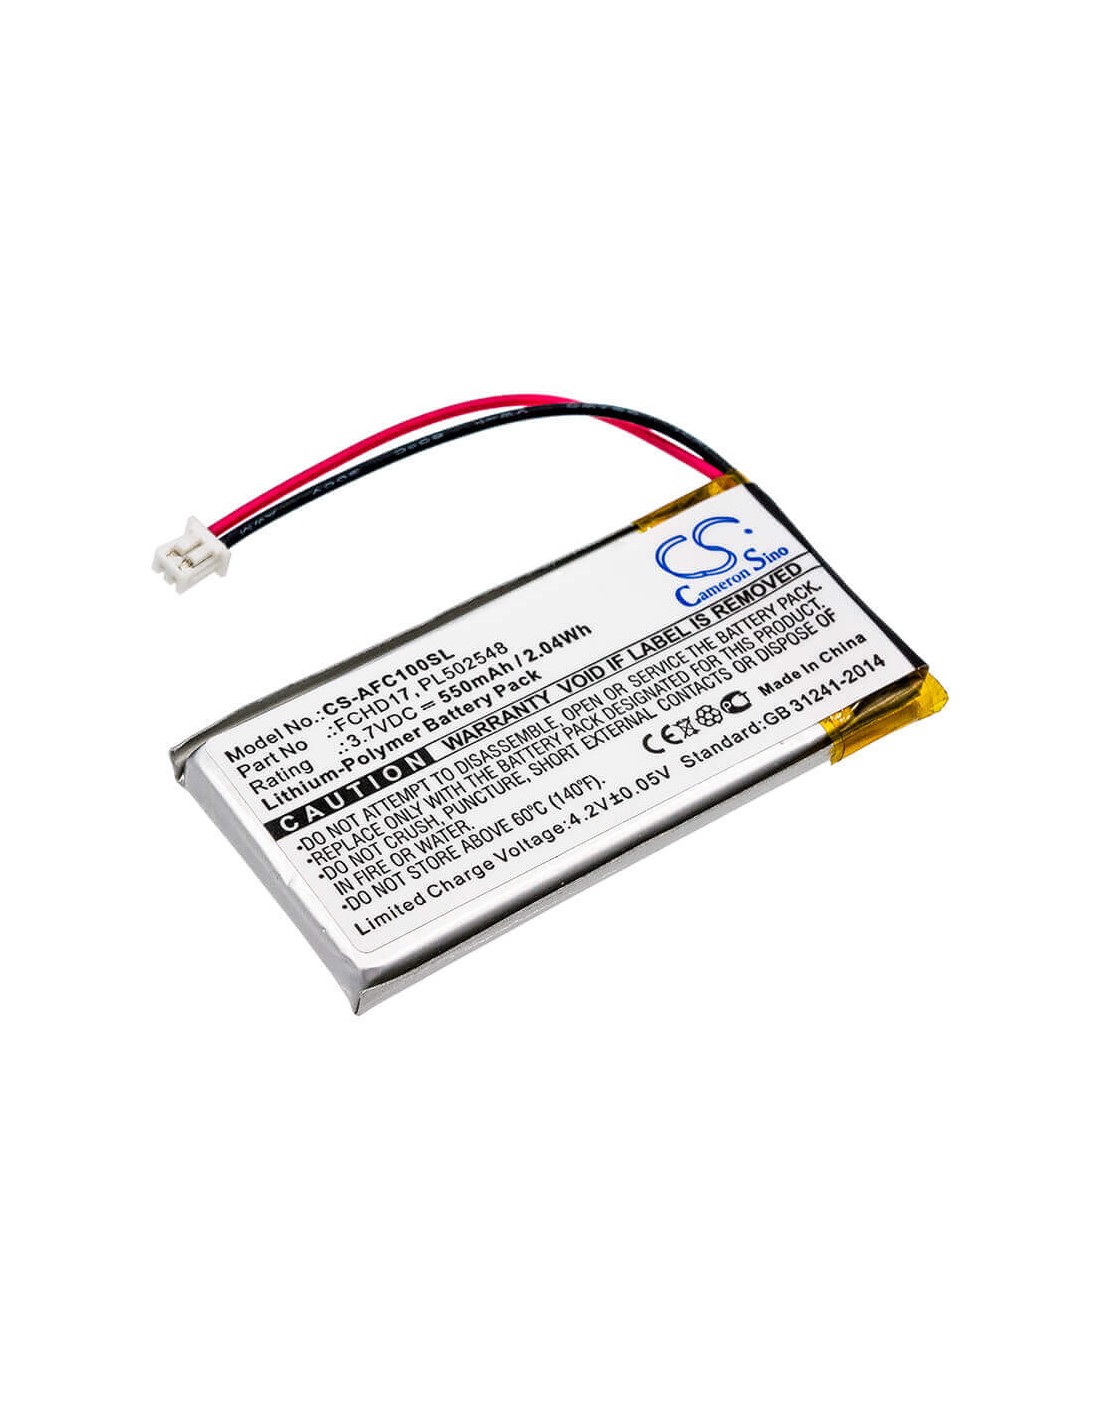 Battery for Acme, Carc, Flycamone 720p, Flycamone Hd 3.7V, 550mAh - 2.04Wh